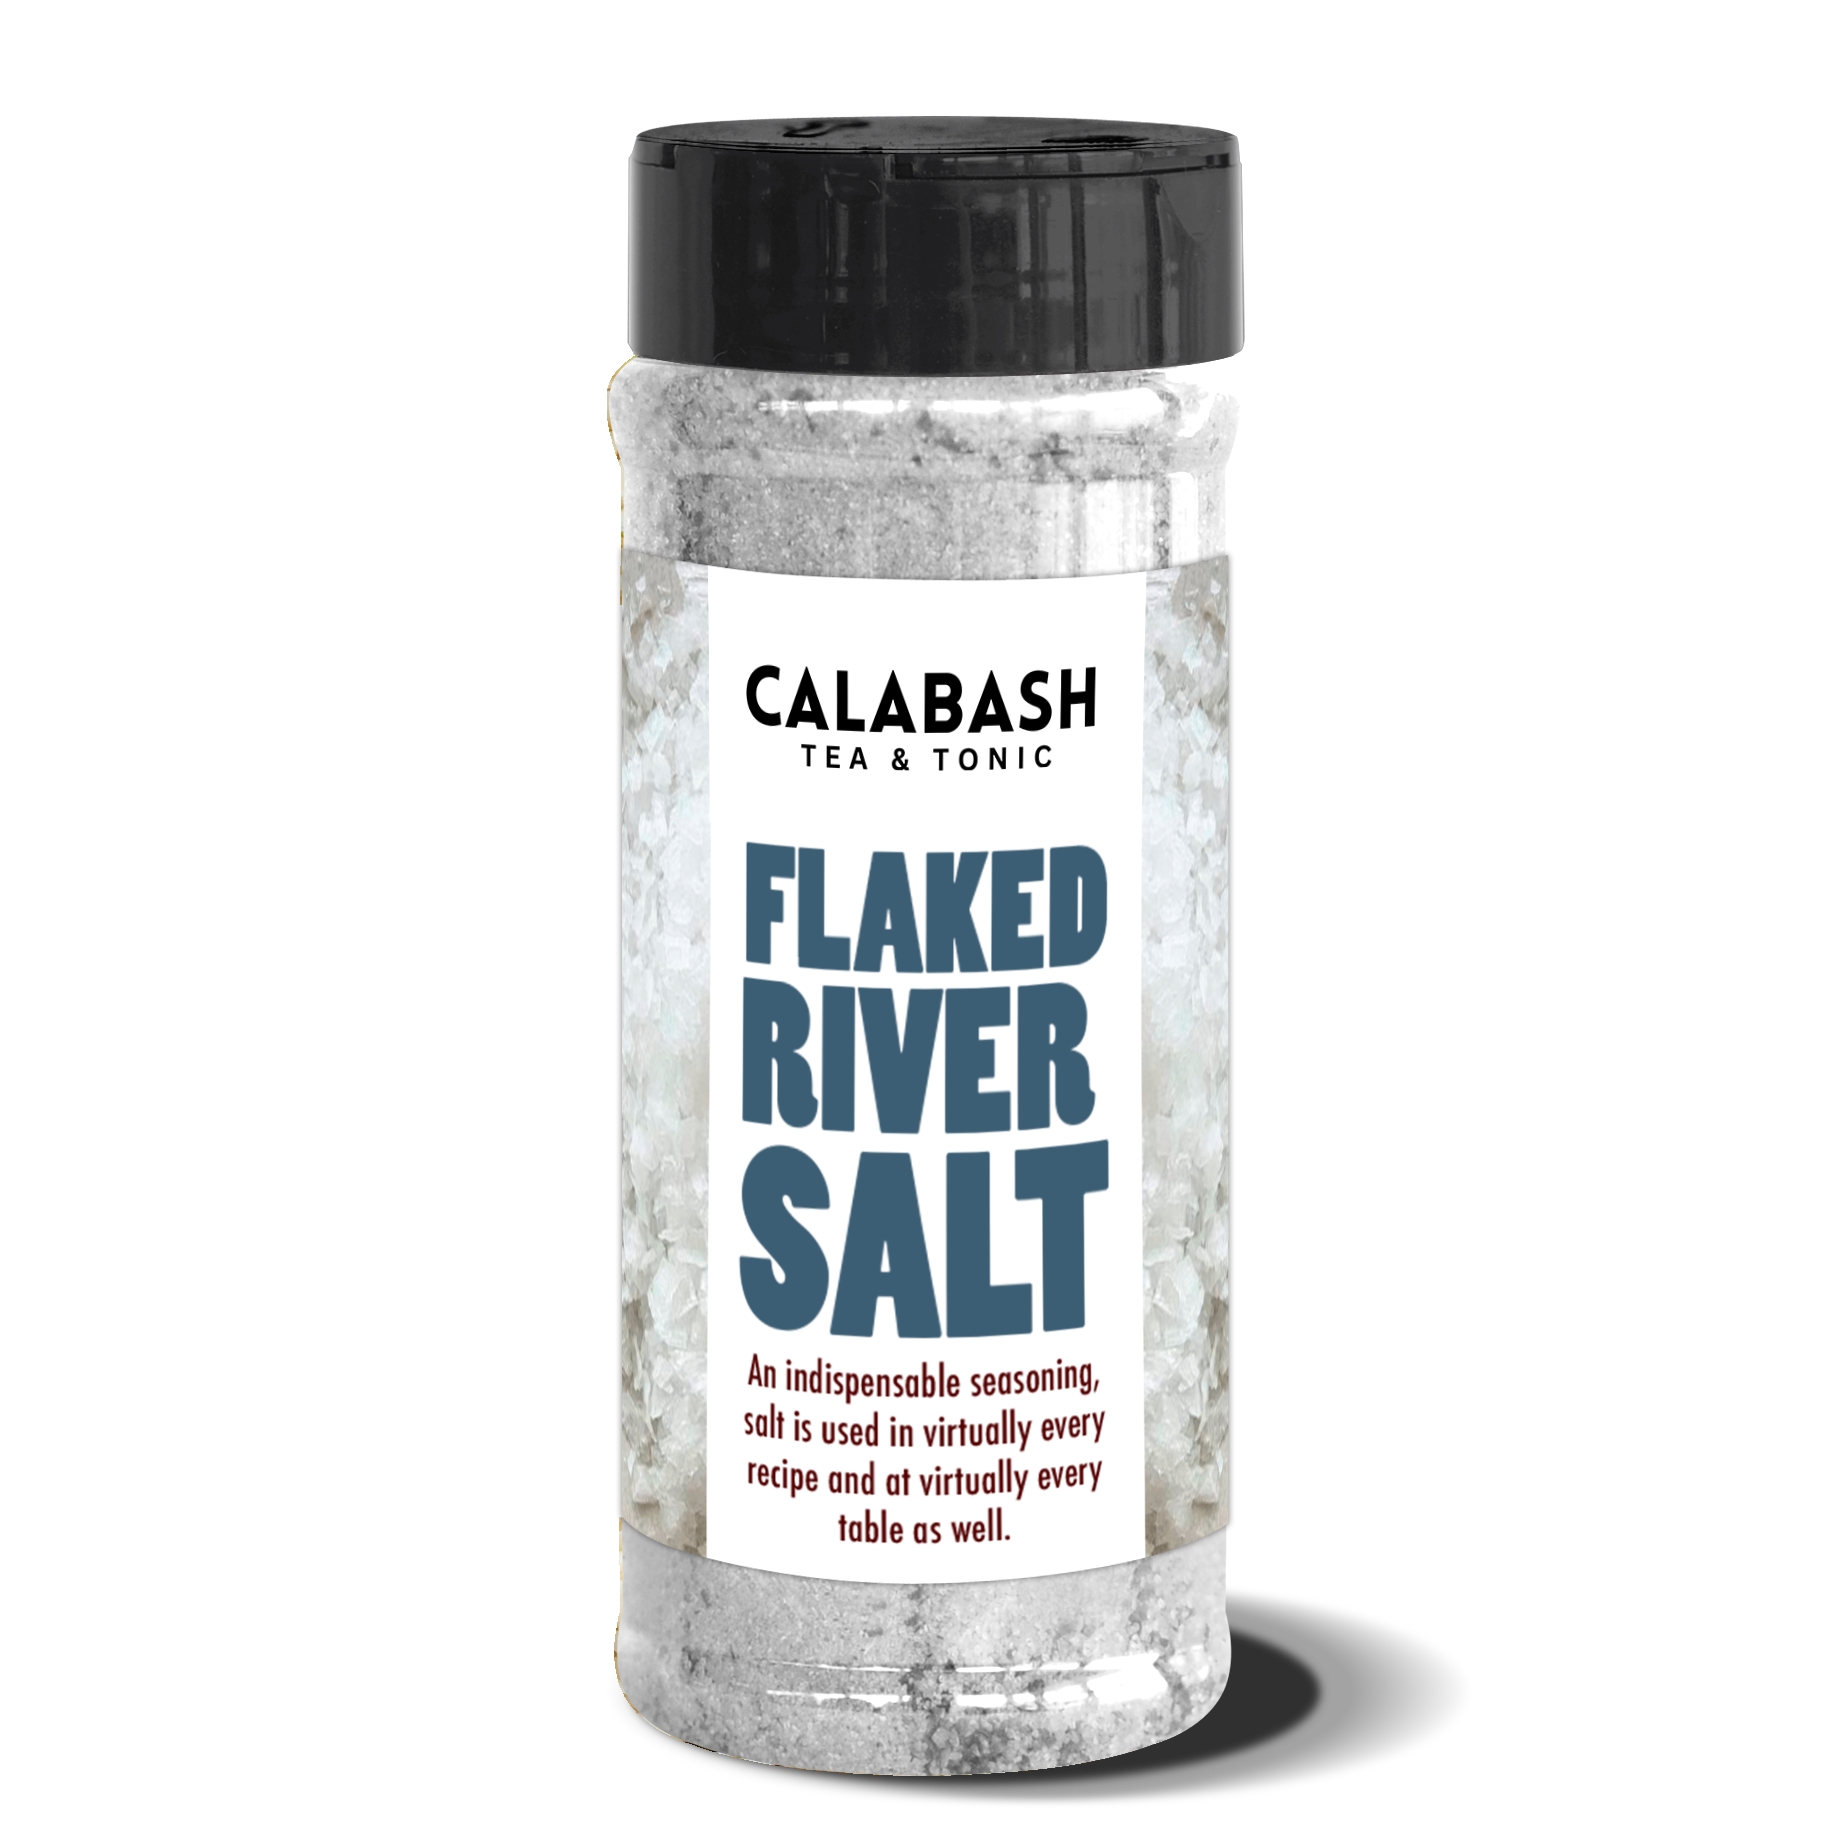 FLAKED RIVER SALT - great as a finish!